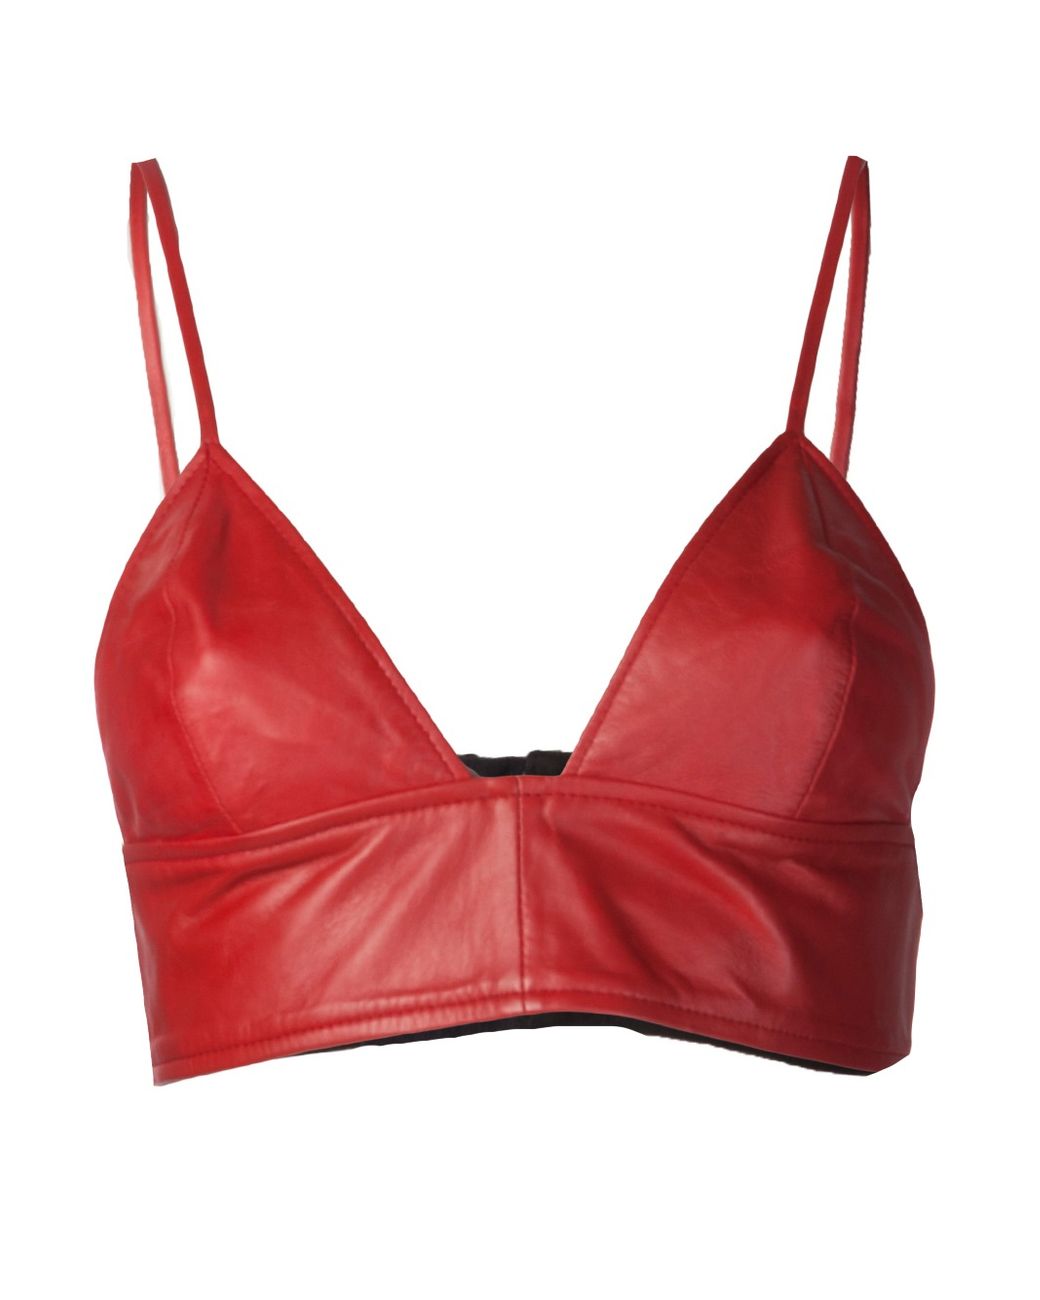 Love Leather Bralette Top in Red